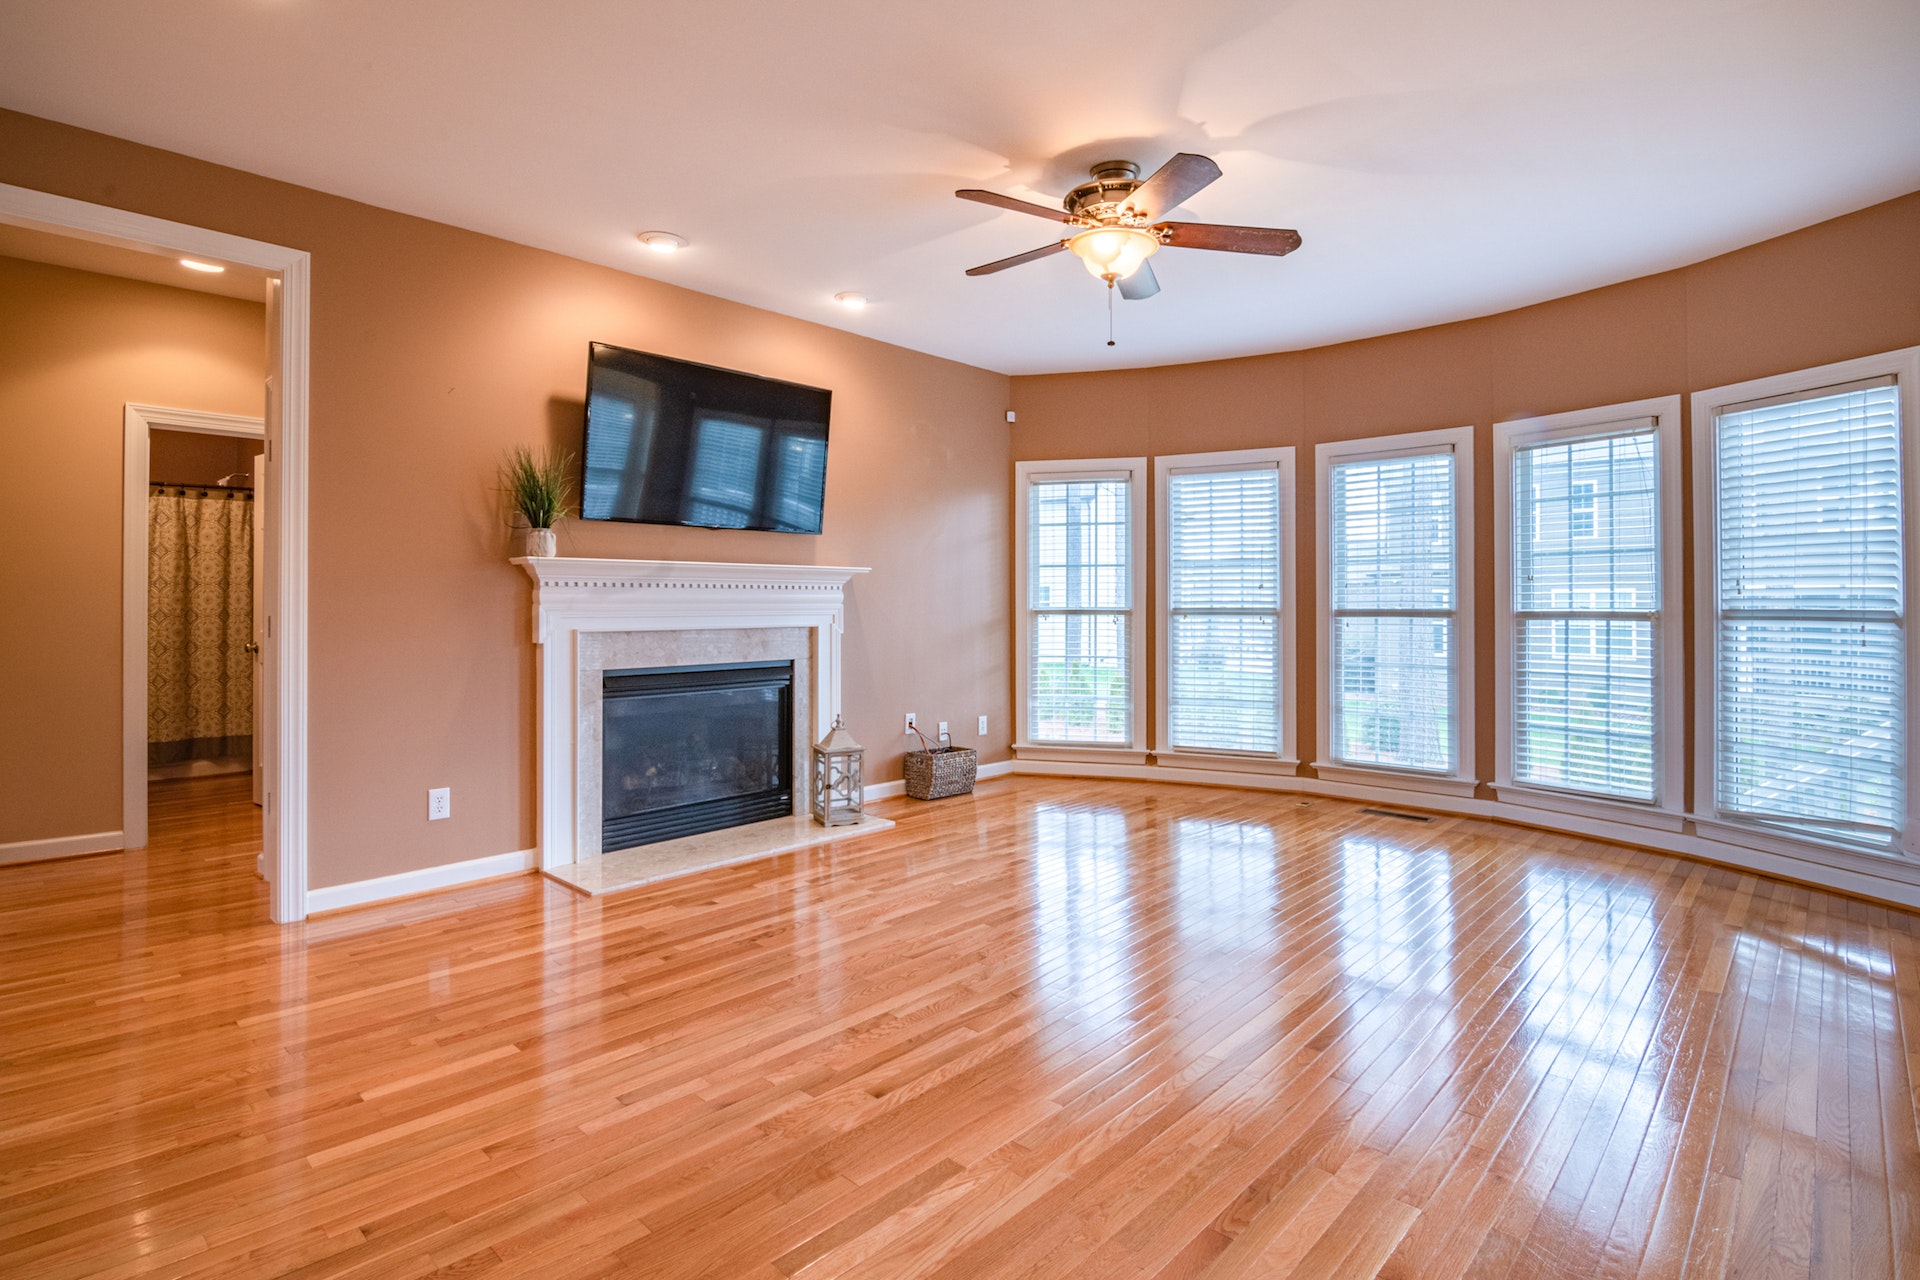 2. Understanding the Importance of Using the Right Vacuum Cleaner for Hardwood Floors